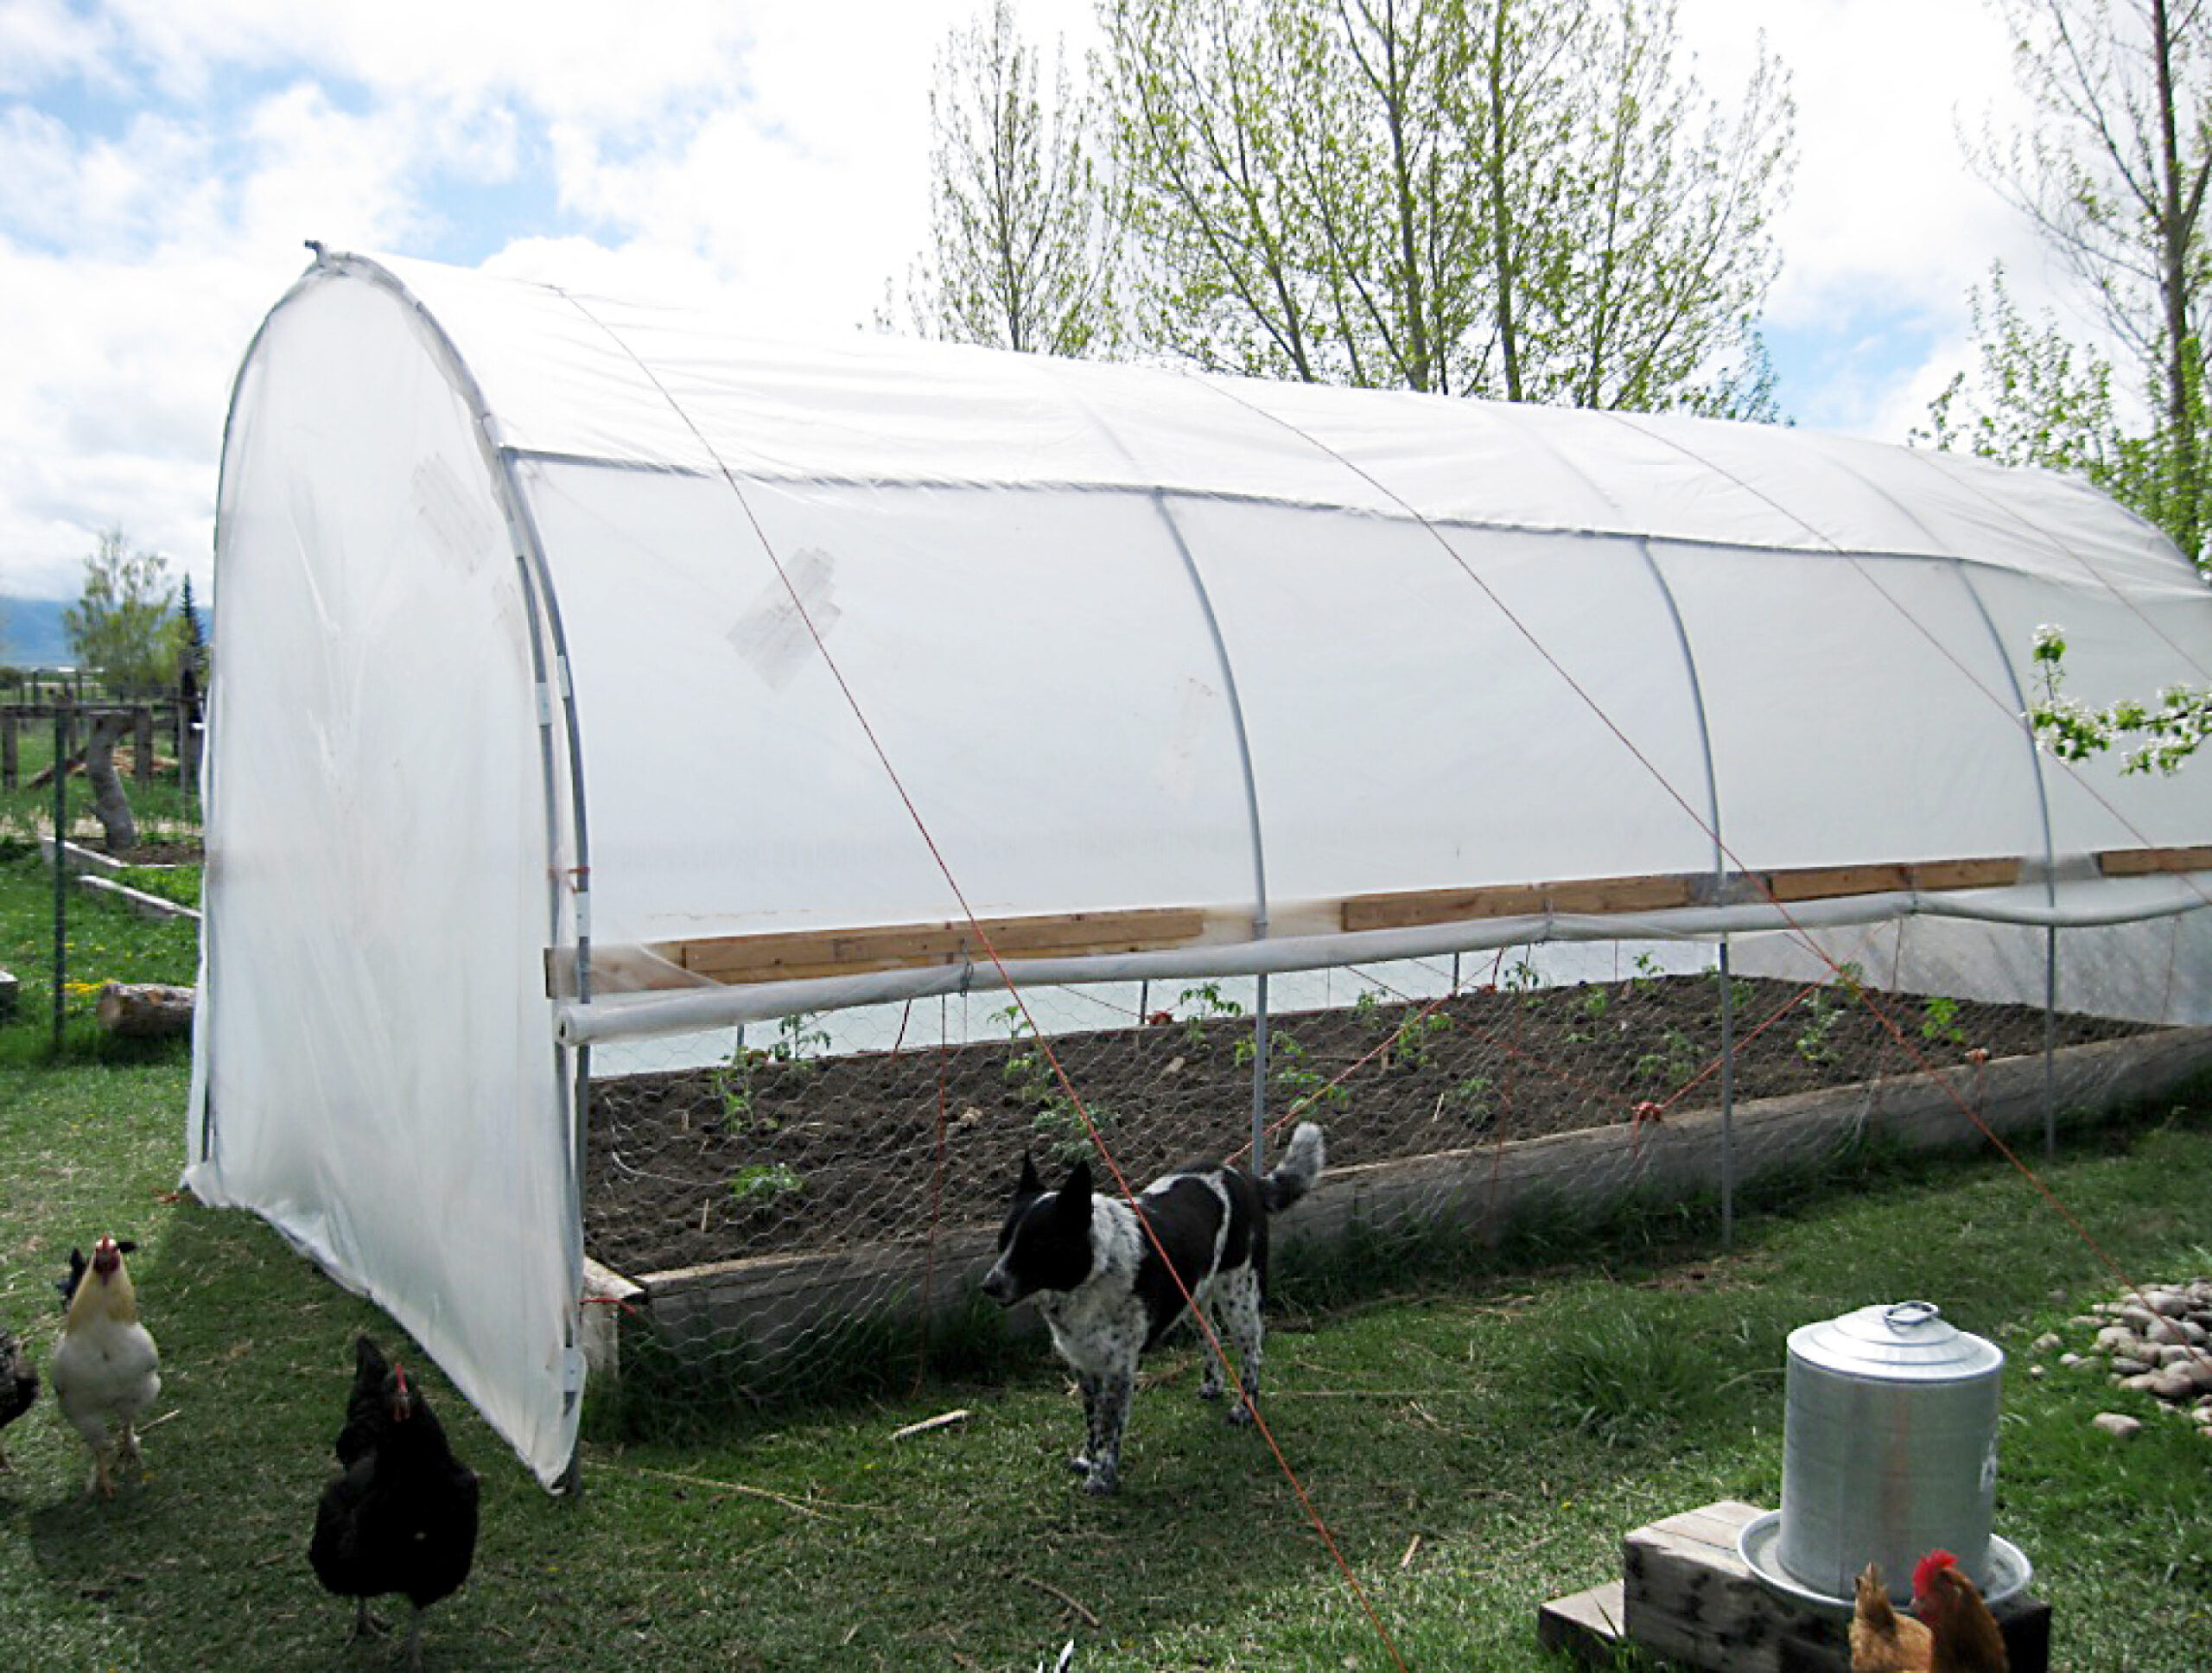 Hoop House Structure with a dog and chickens in foreground